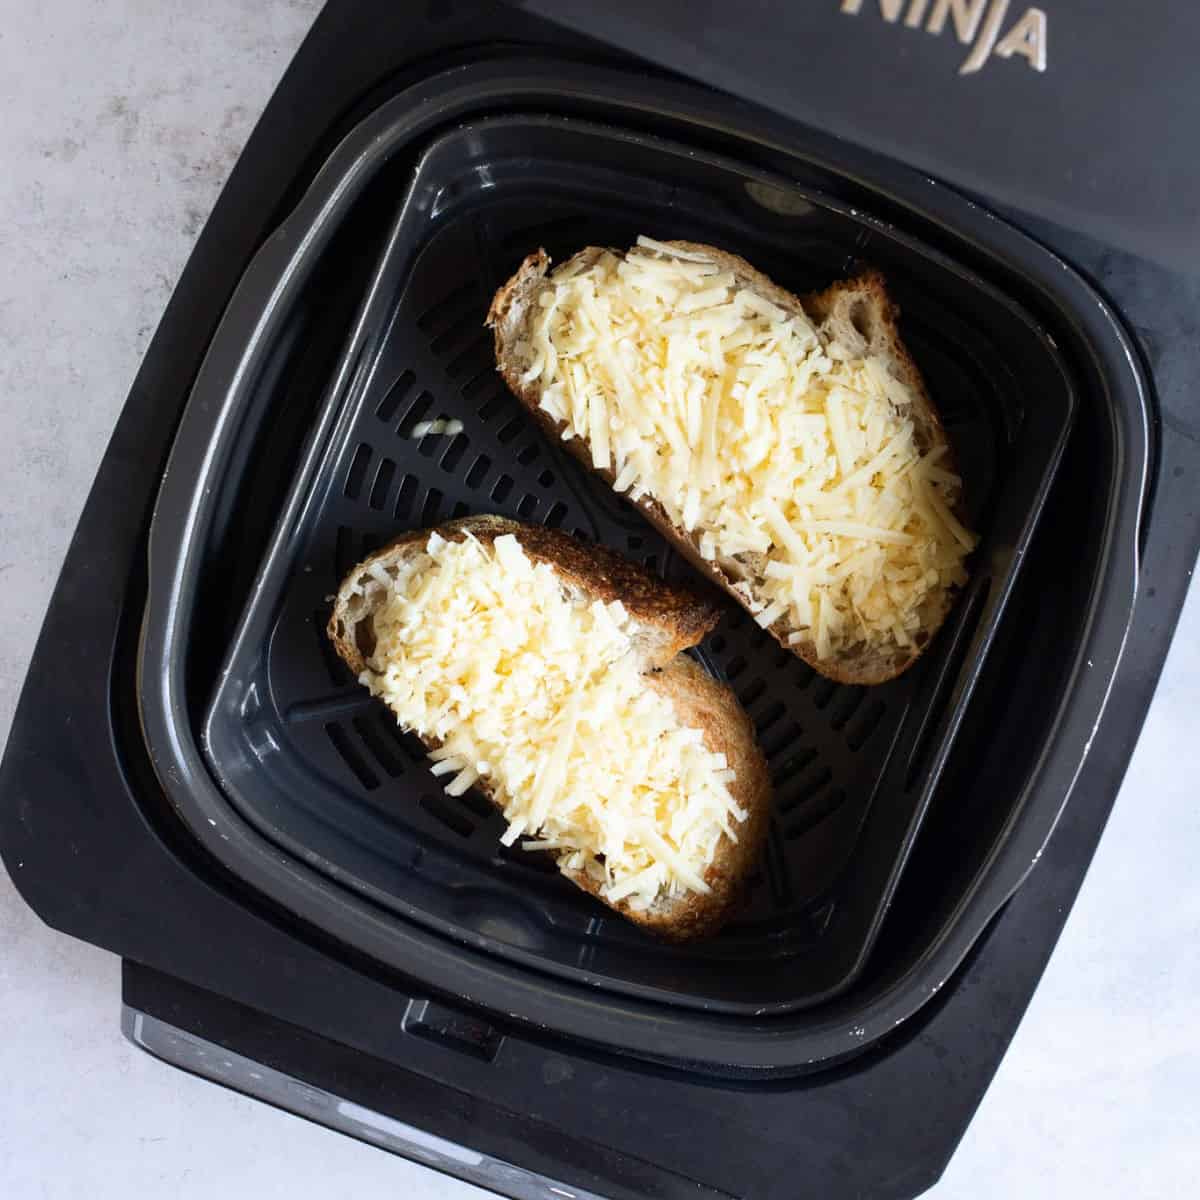 Two slices of cheese on toast in Ninja air fryer.